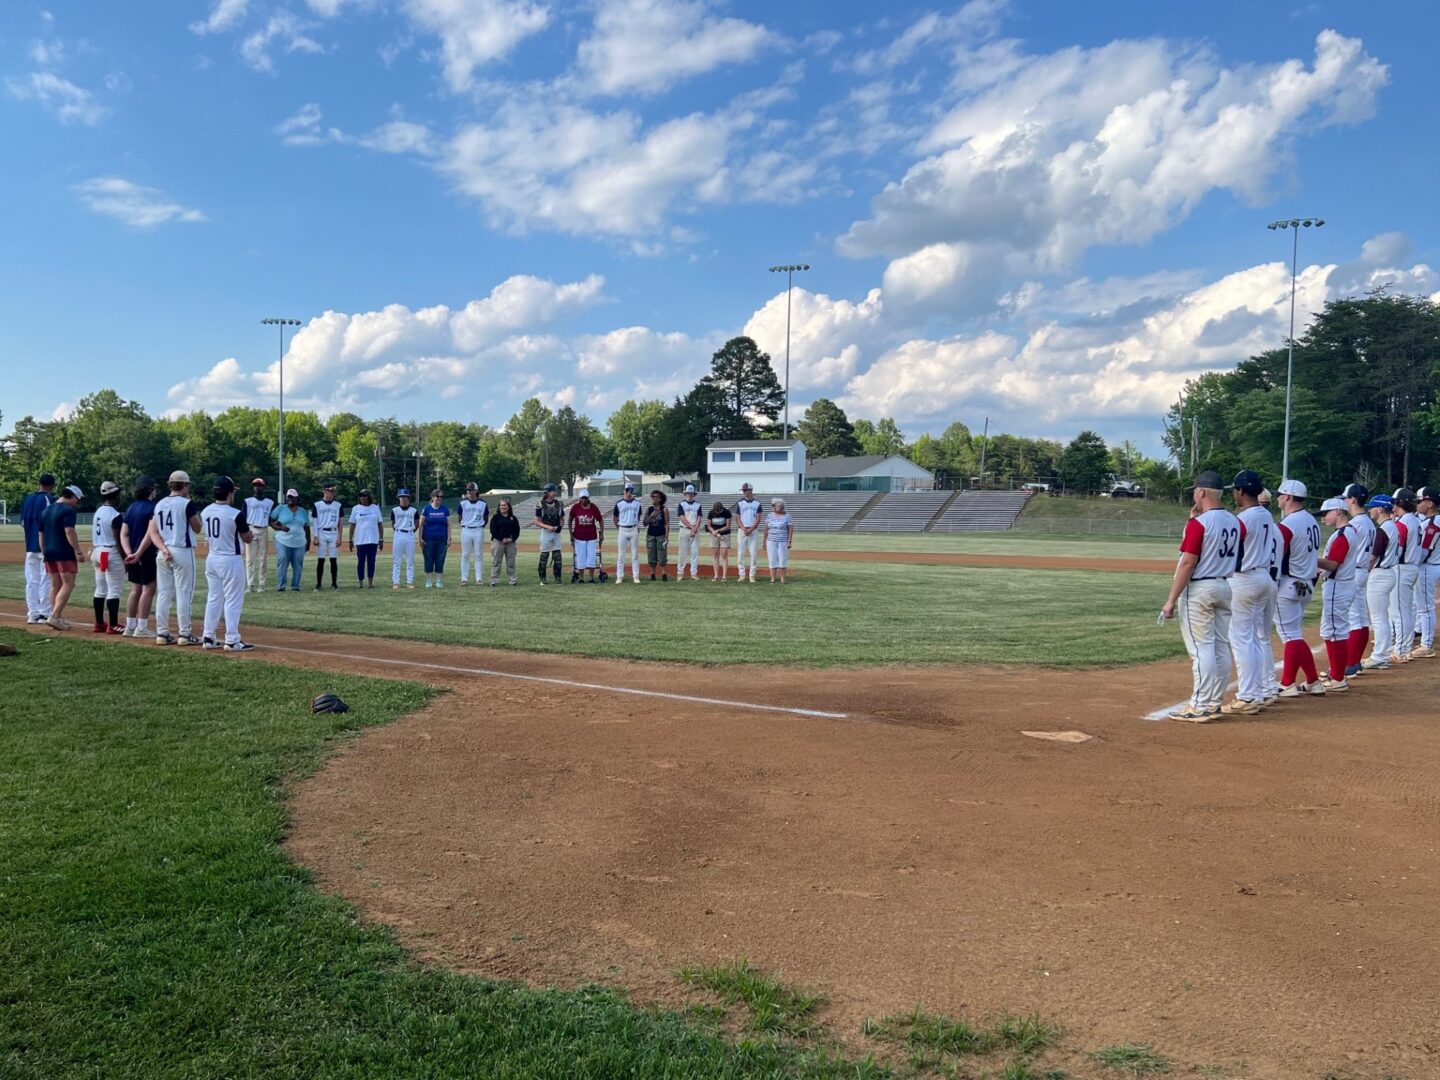 Baseball teams lined up on a field.